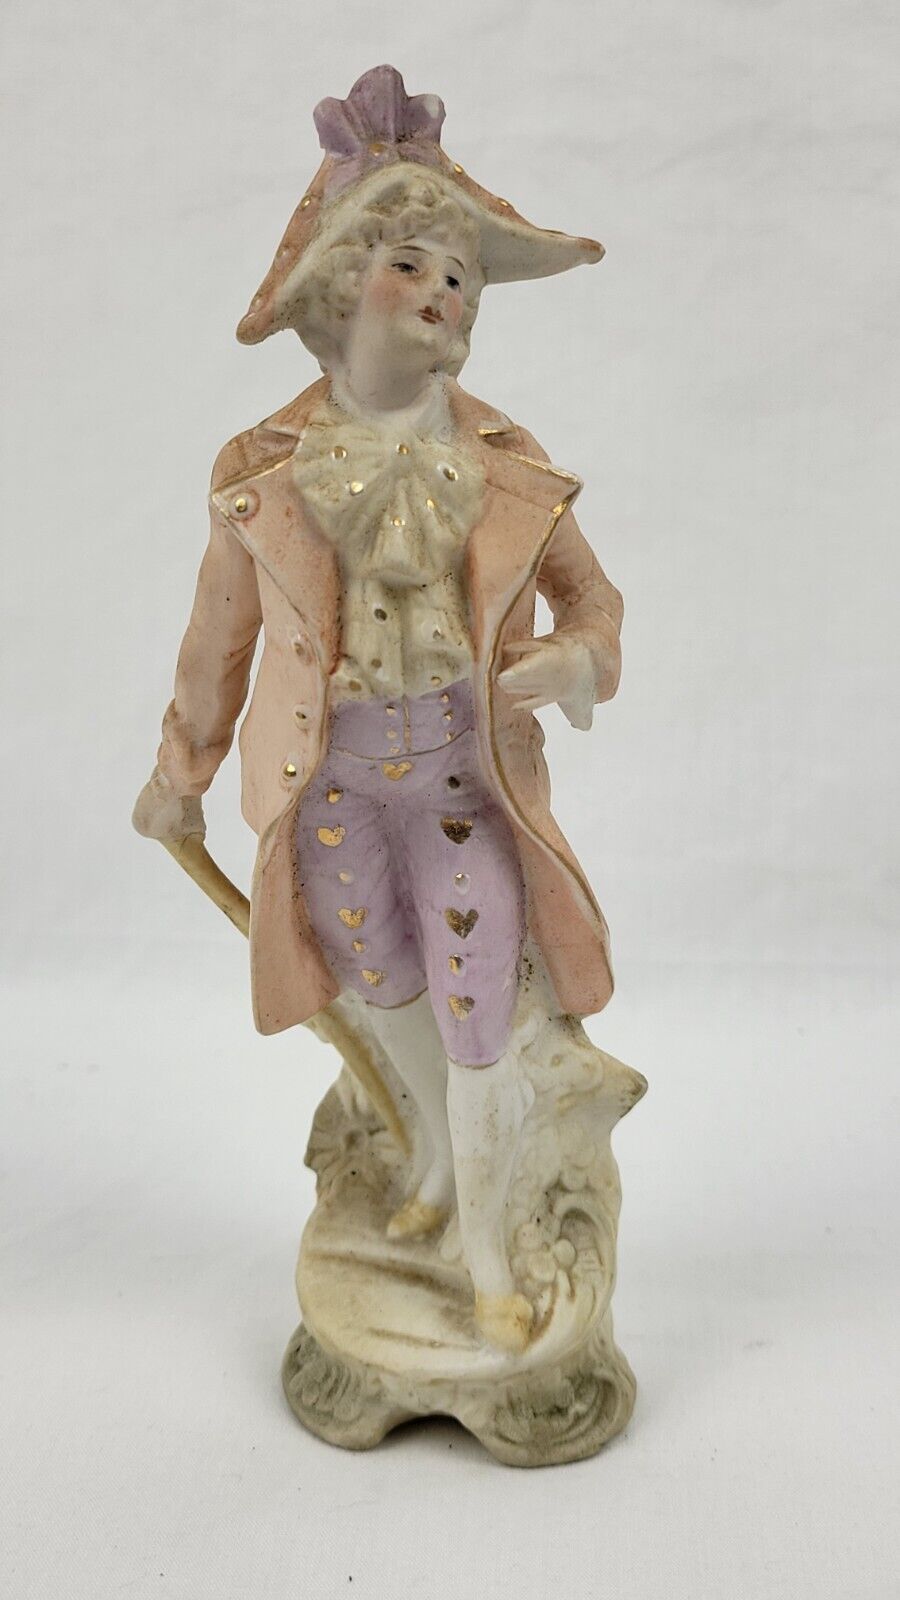 Vintage Ceramic Figurine, Hearts, Painted, French Victorian Man